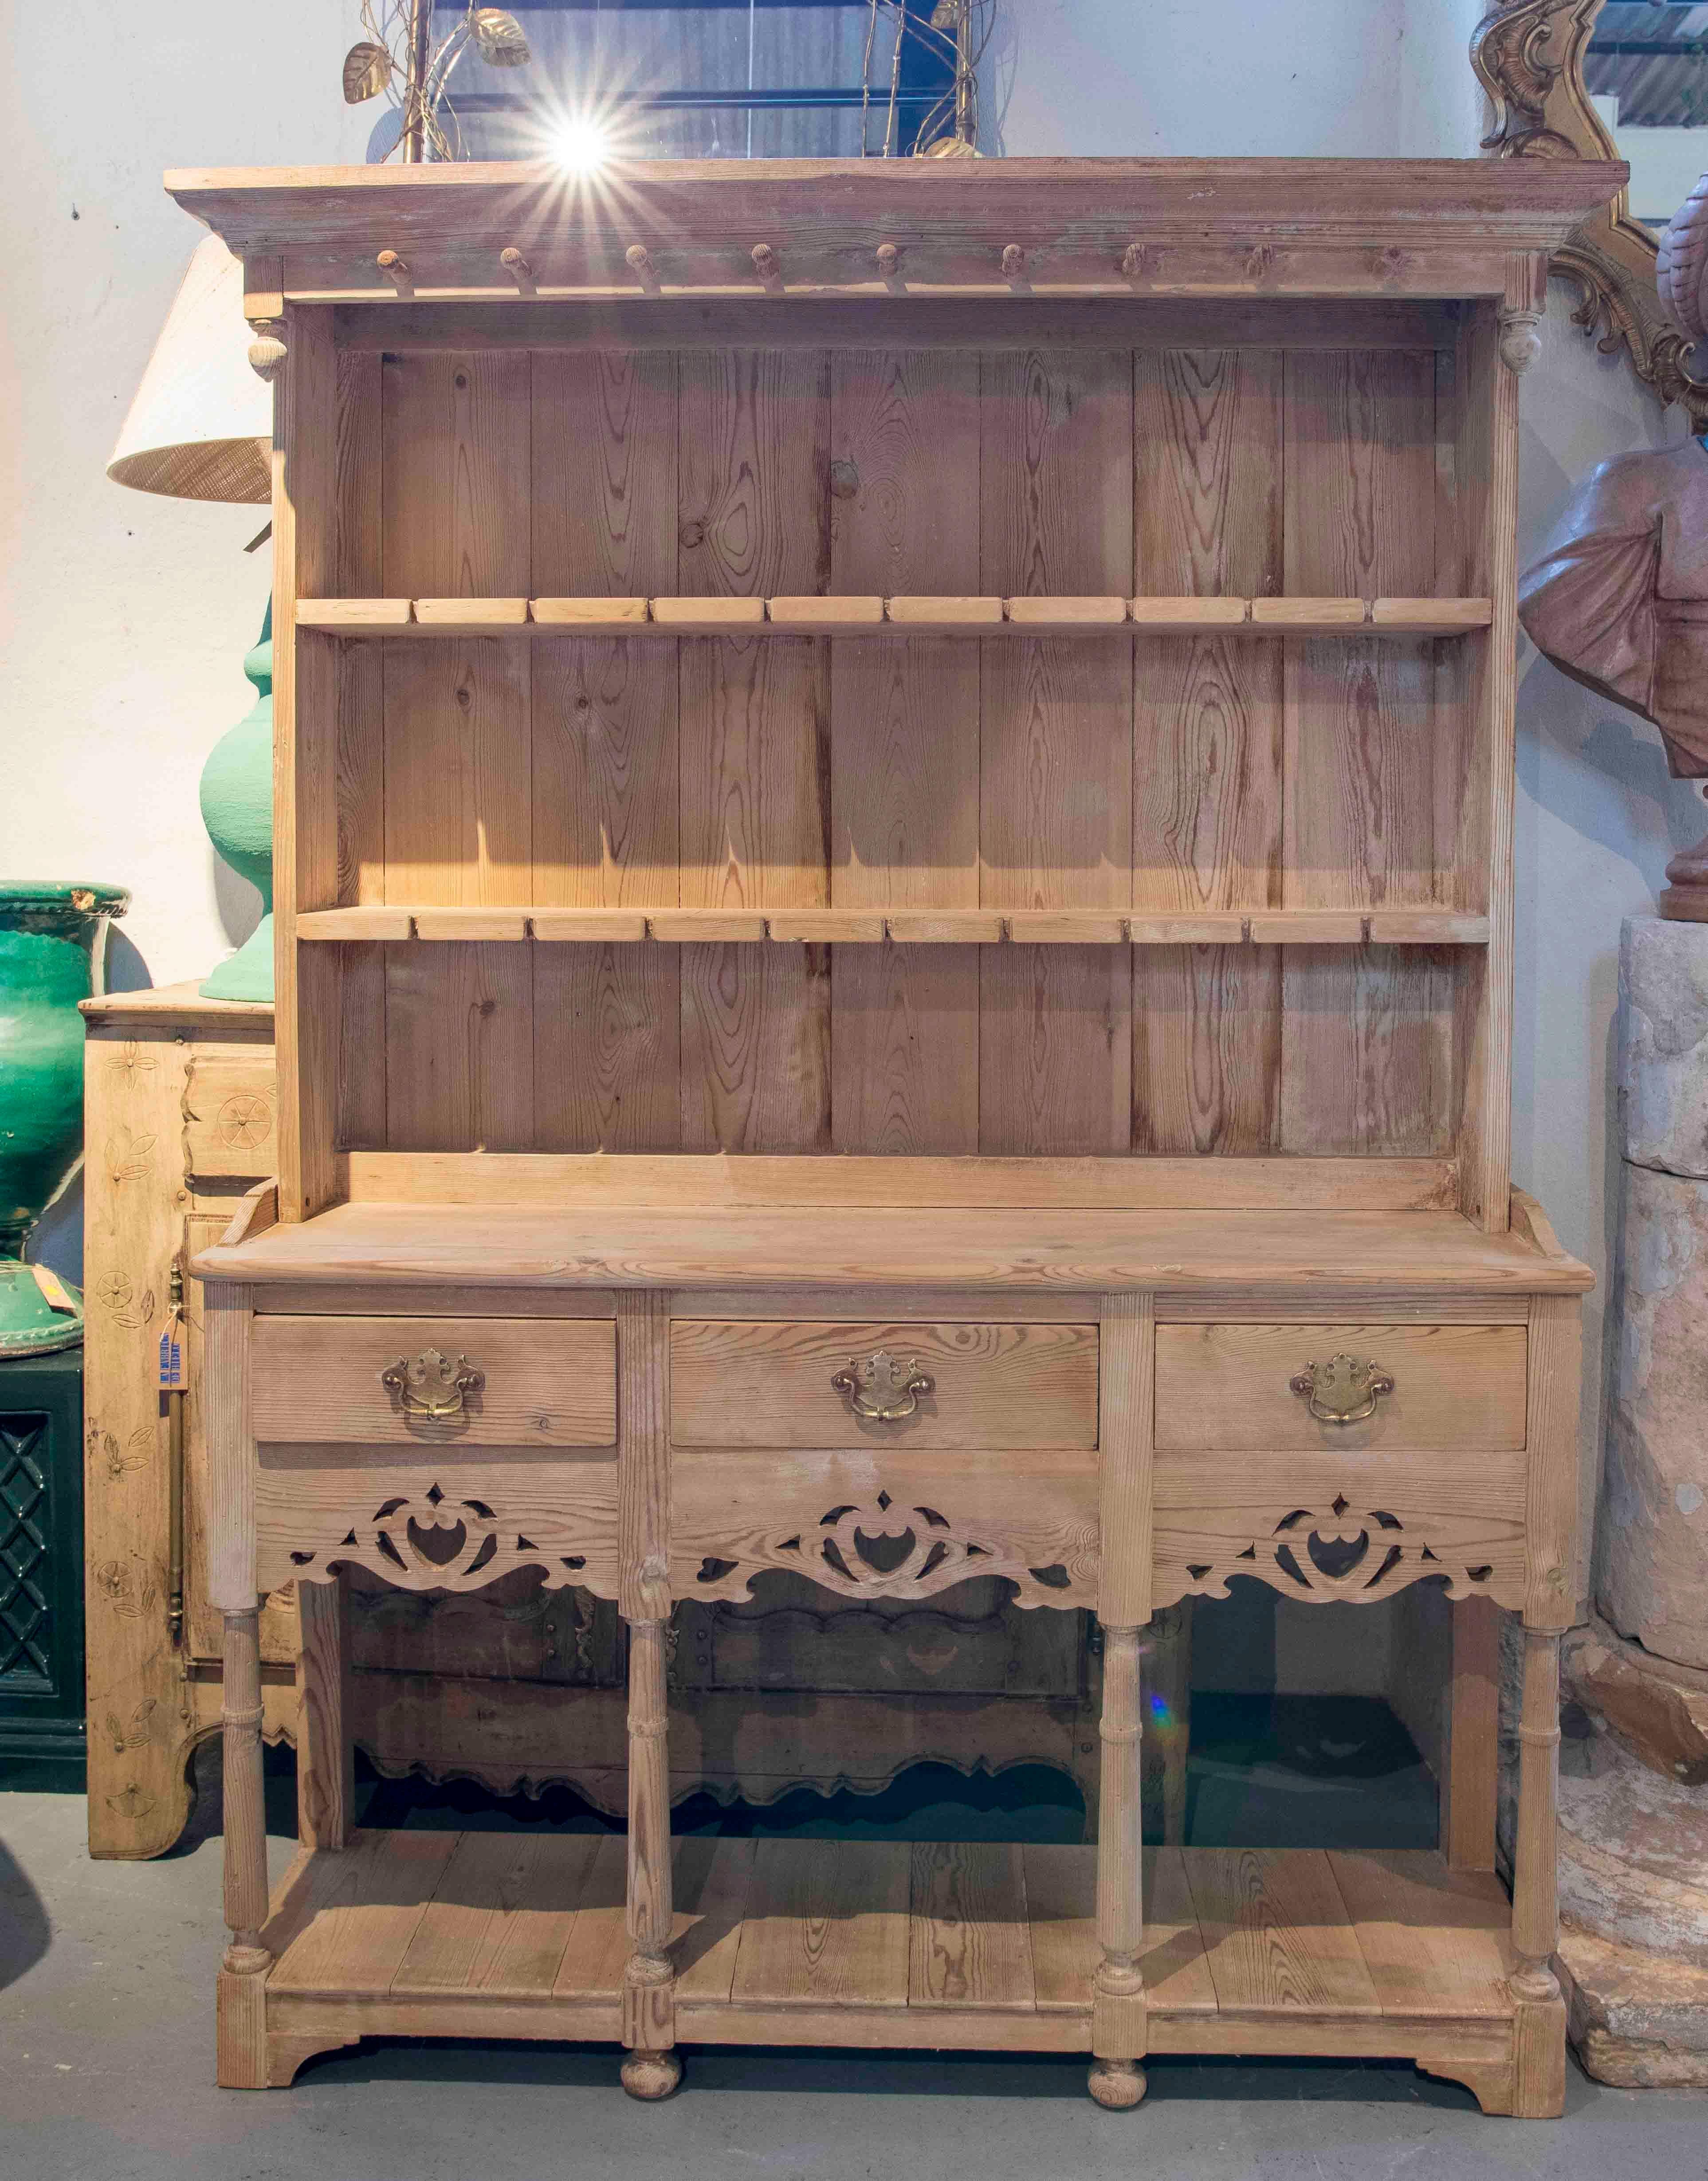 19th Century Spanish Pine Chest with Shelves and Drawers.